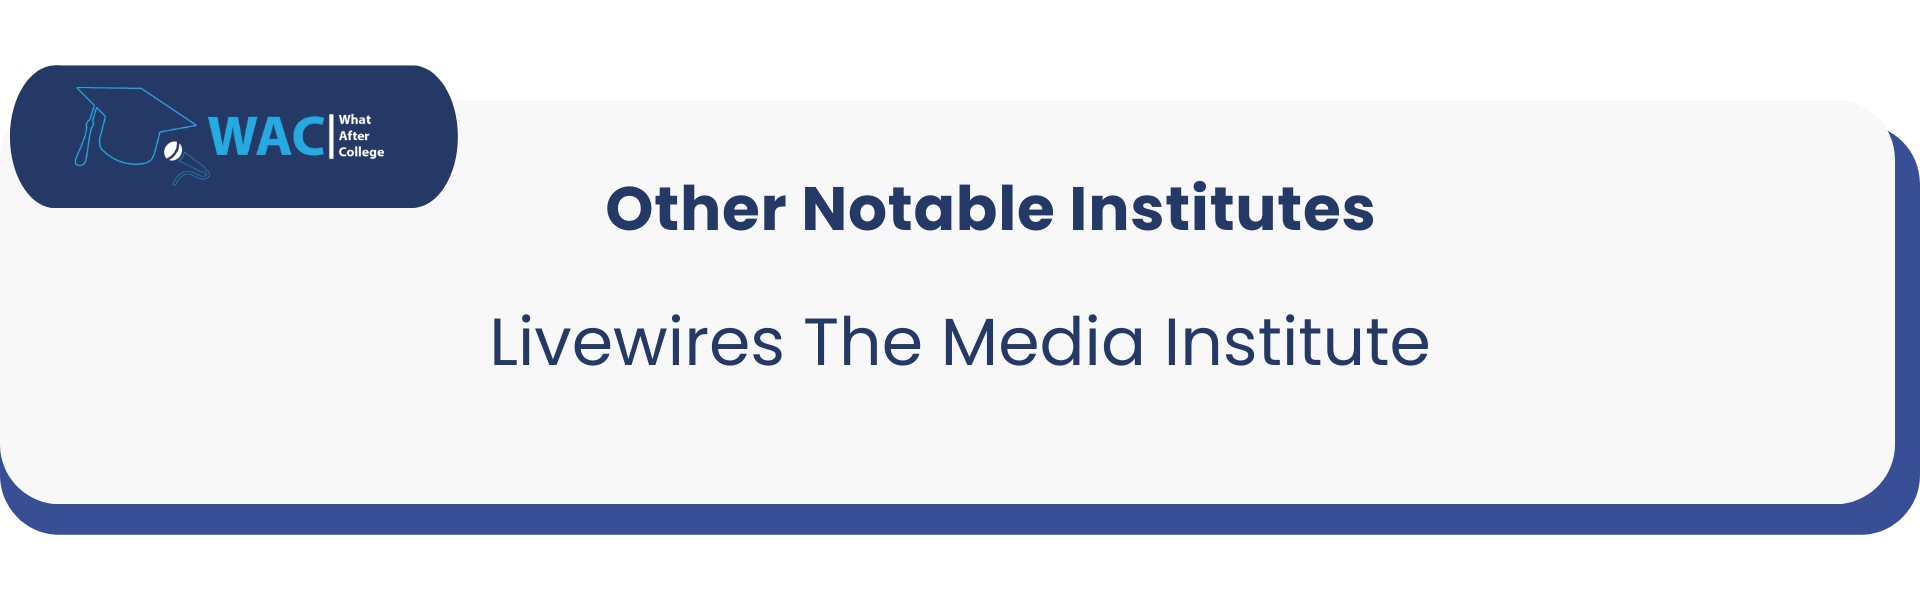 Other: 1 Livewires The Media Institute